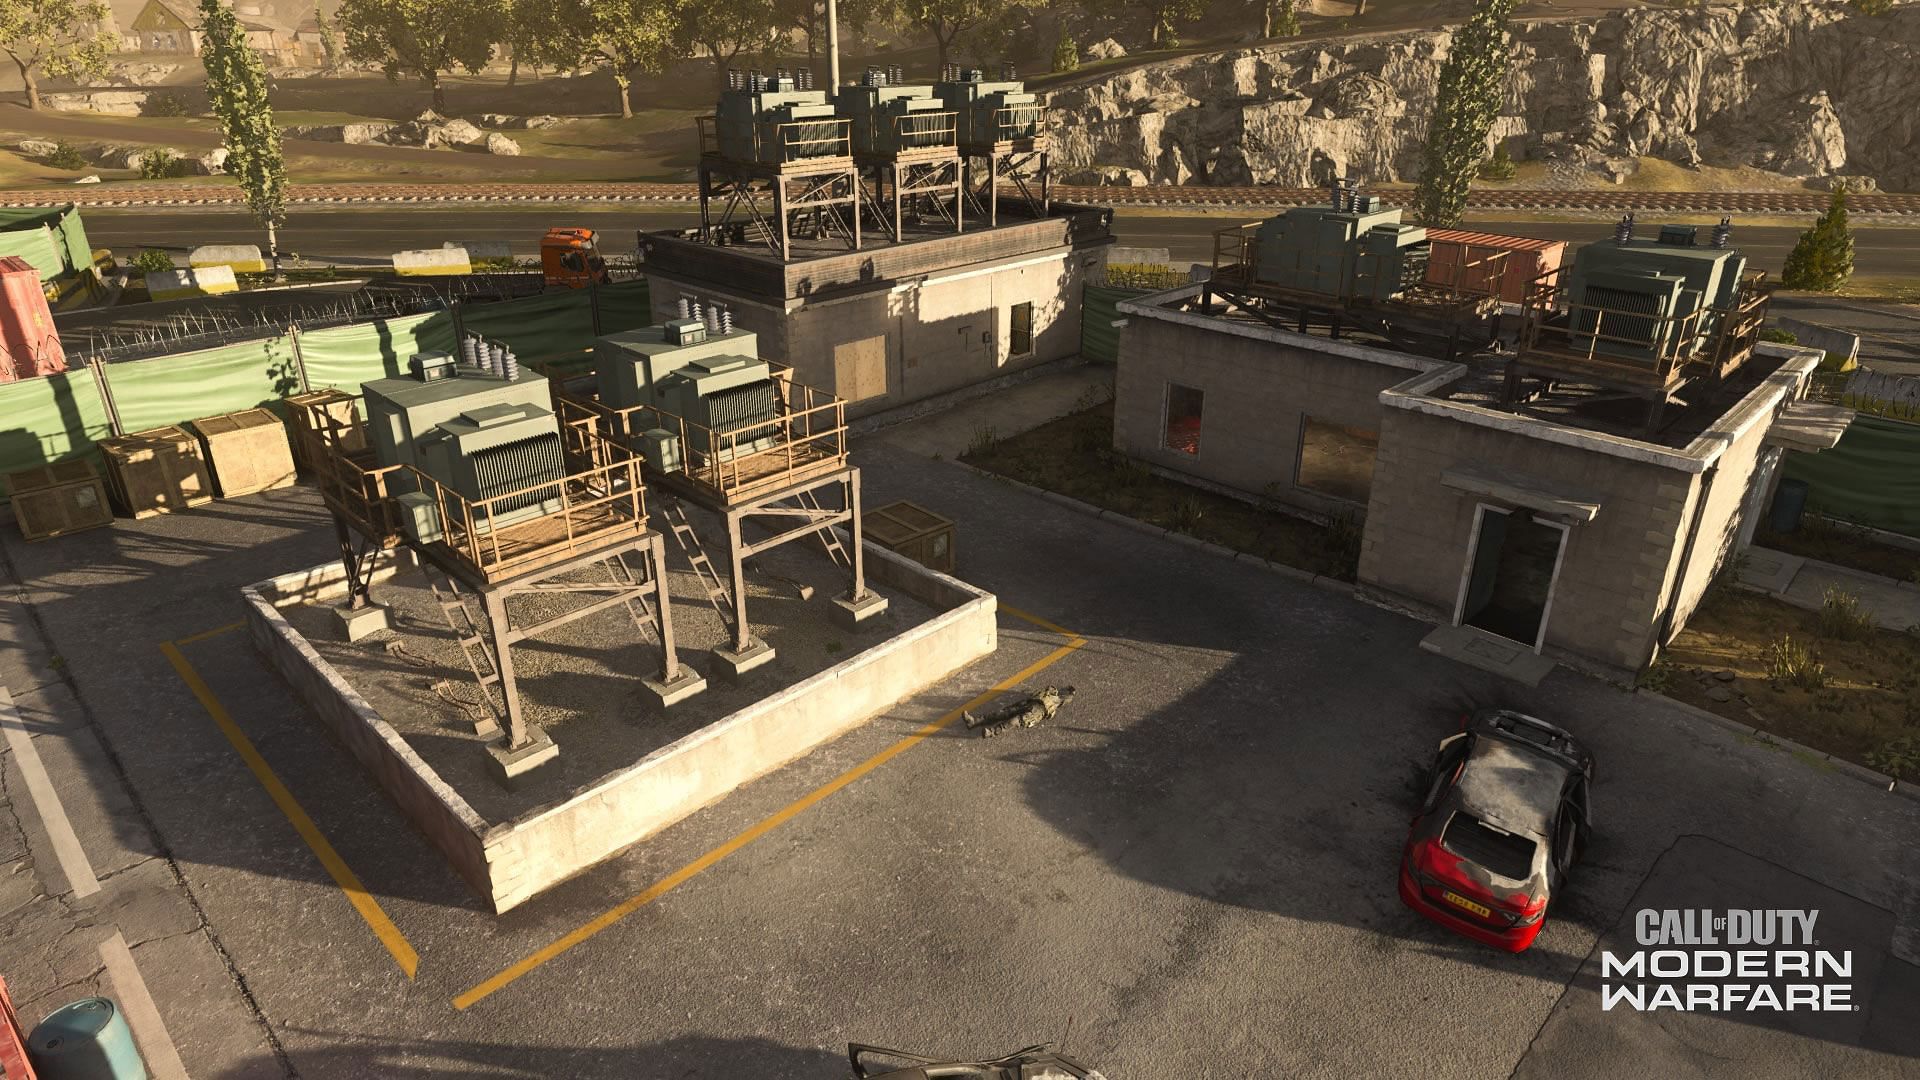 Vacant from Modern Warfare 2019 is coming to COD Mobile in Season 10, a public beta test build has revealed (Image via Activision)